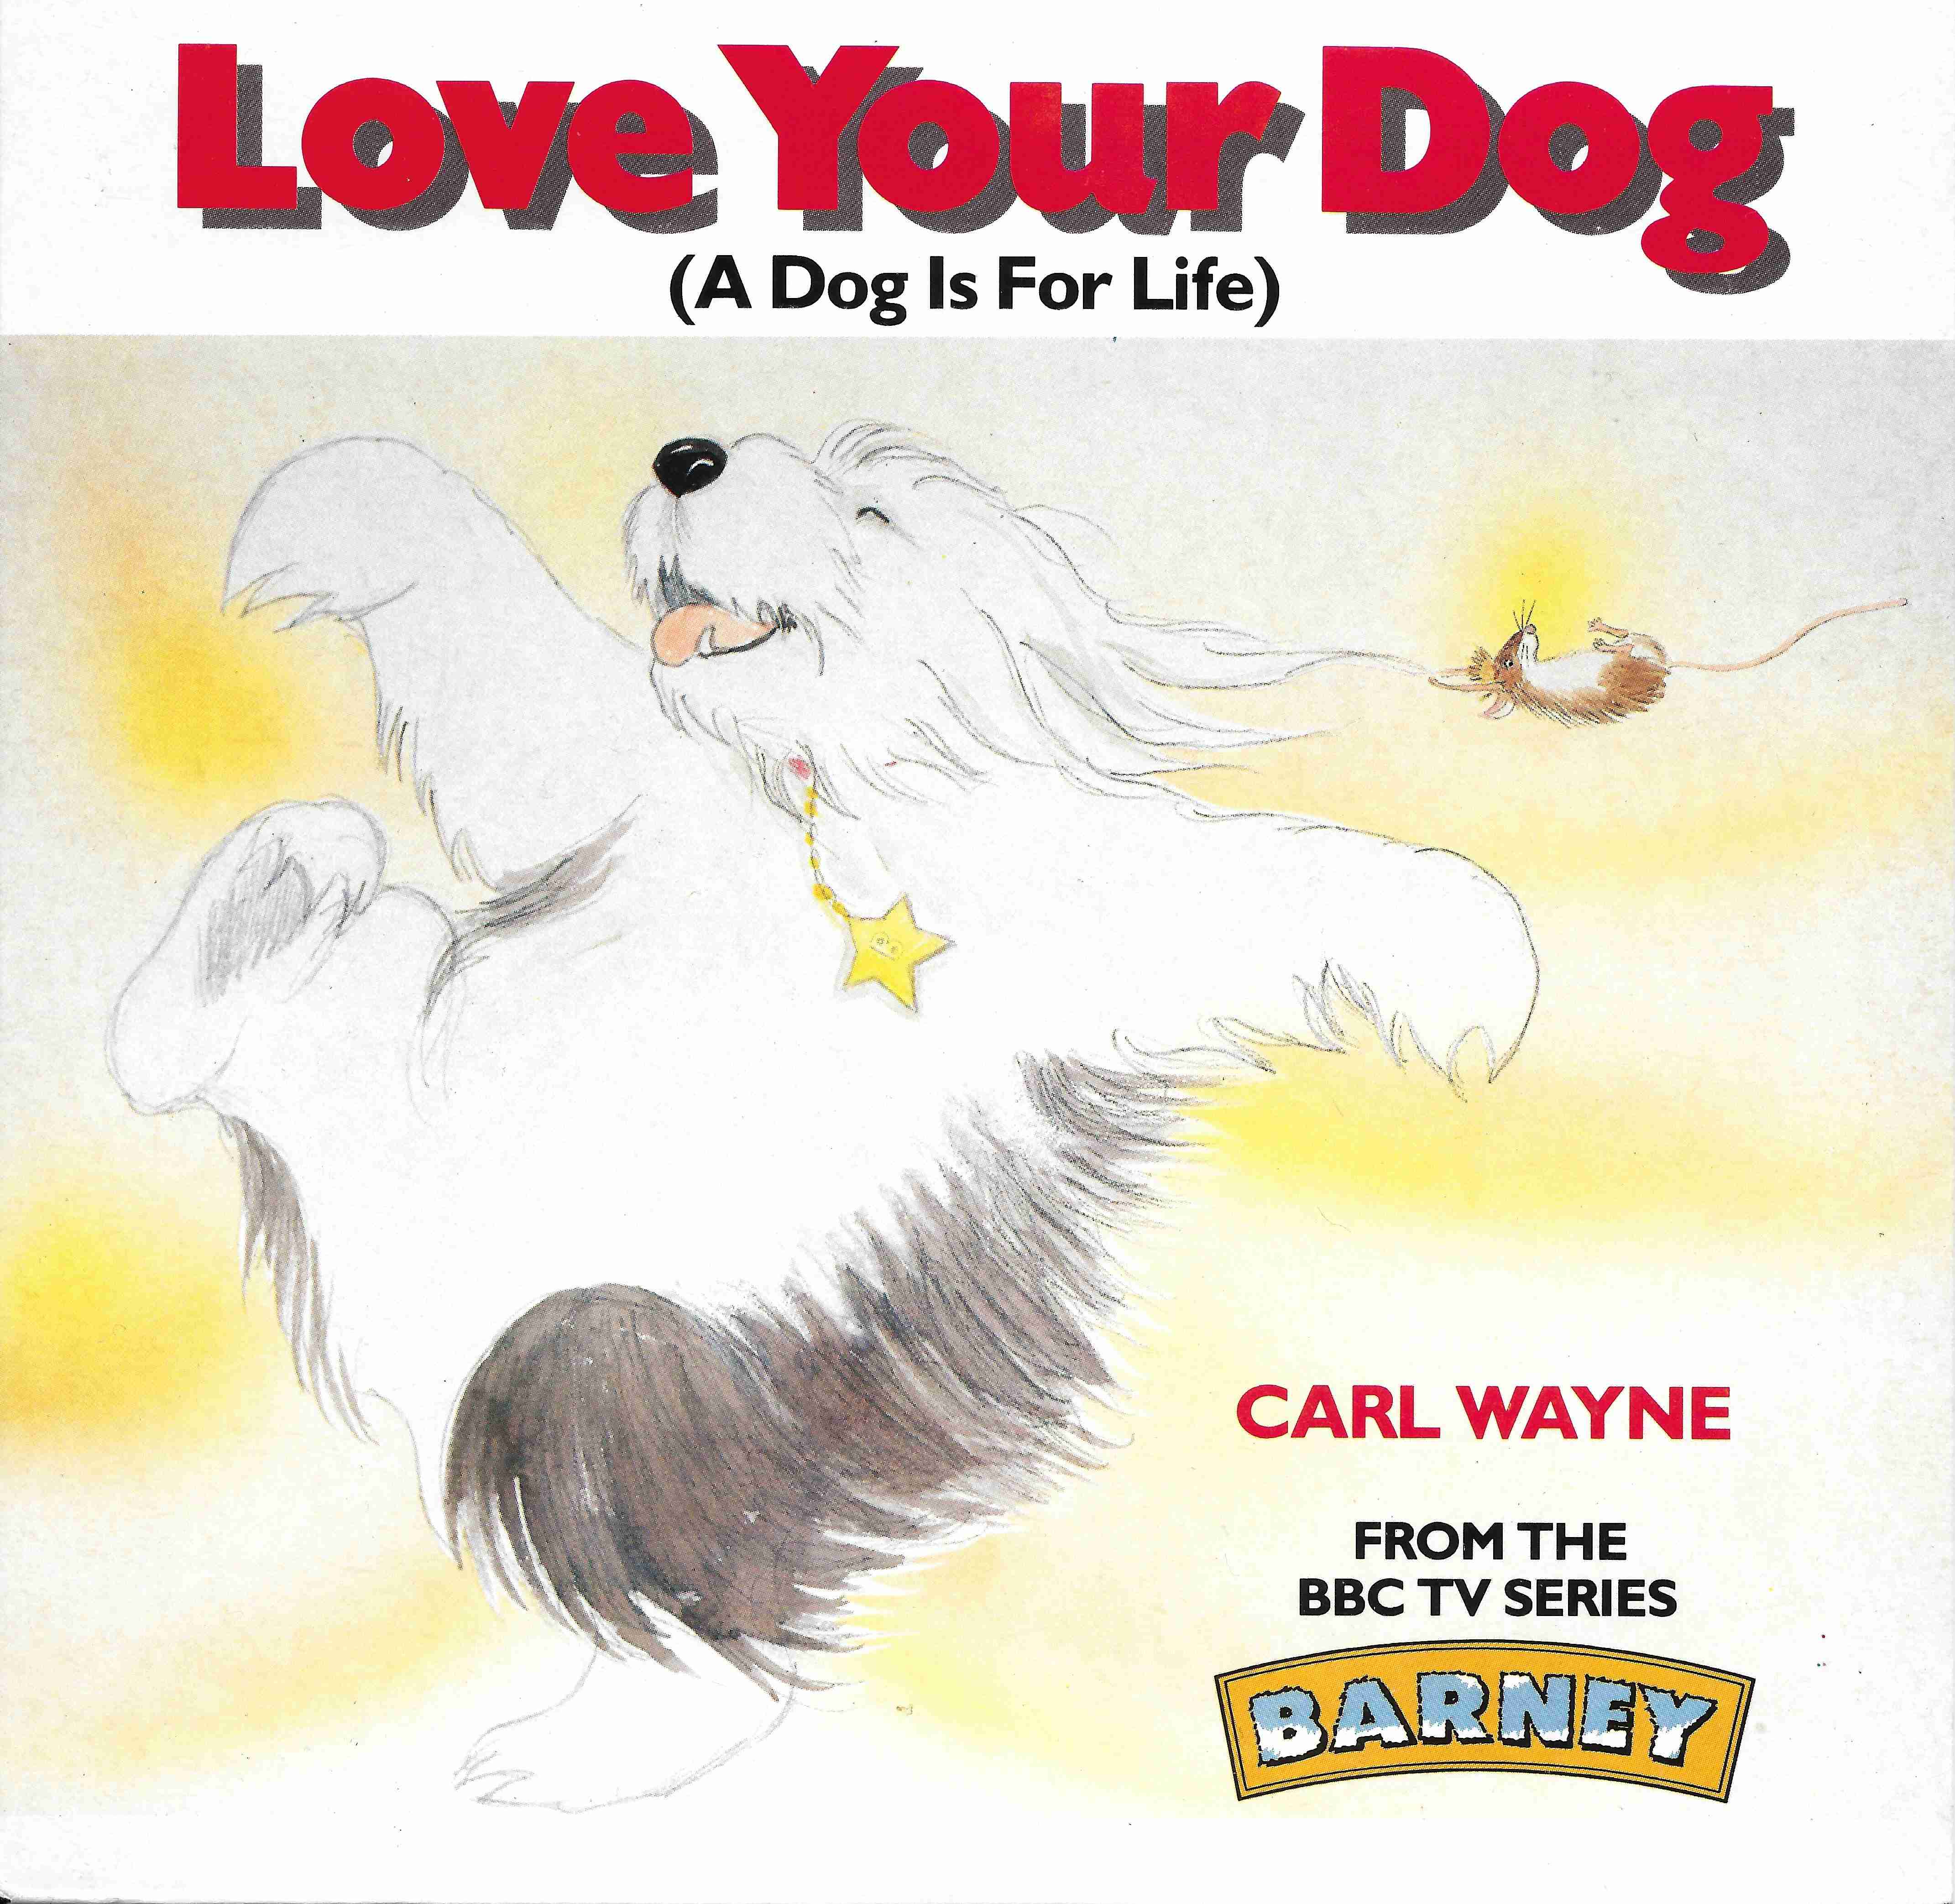 Picture of RESL 233 Love your dog (Barney) by artist Carl Wayne / Mini Pops from the BBC records and Tapes library